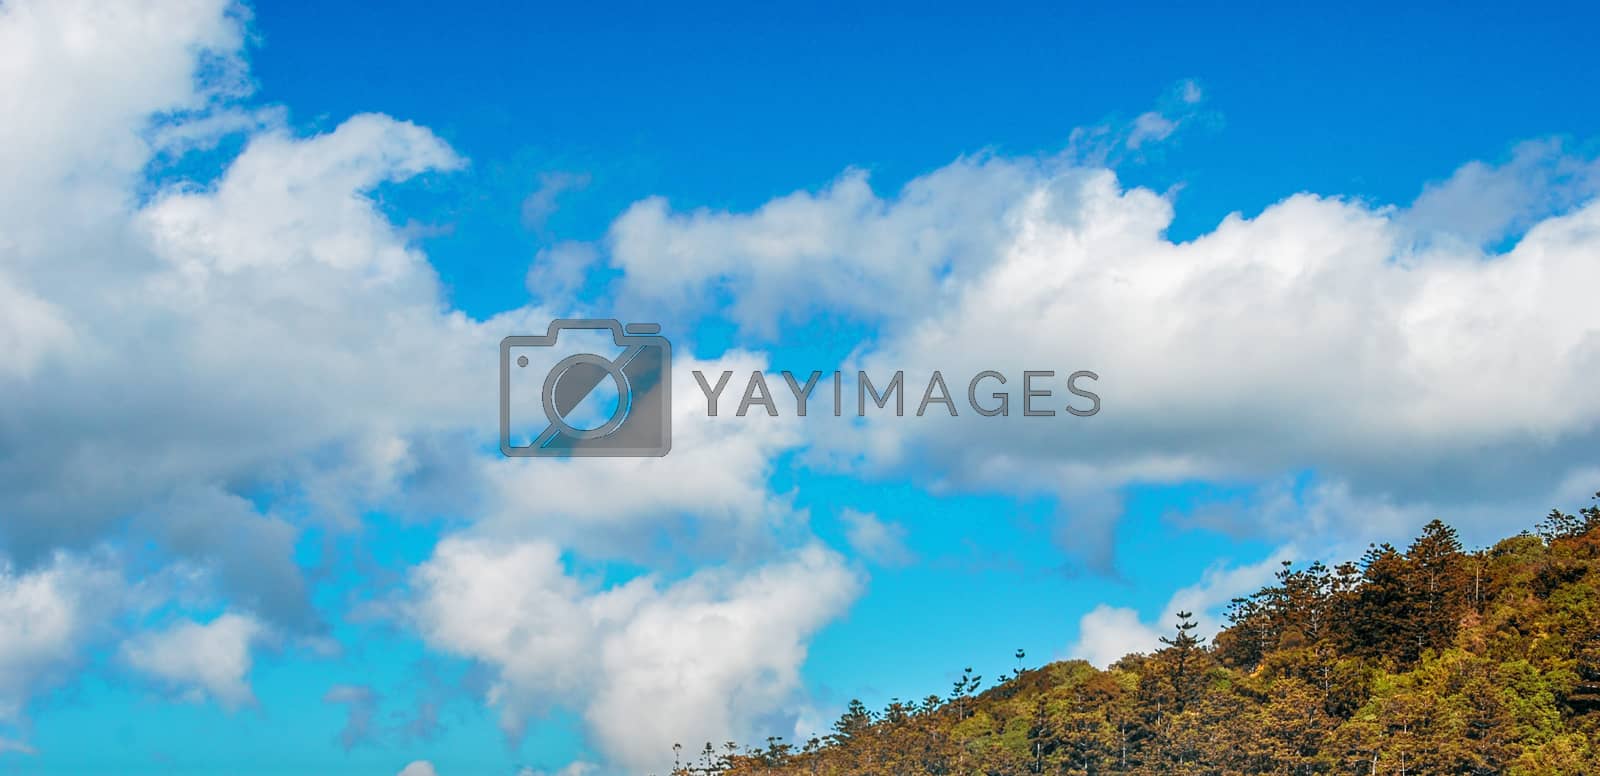 Royalty free image of Blue sky with clouds over green forest by jovannig